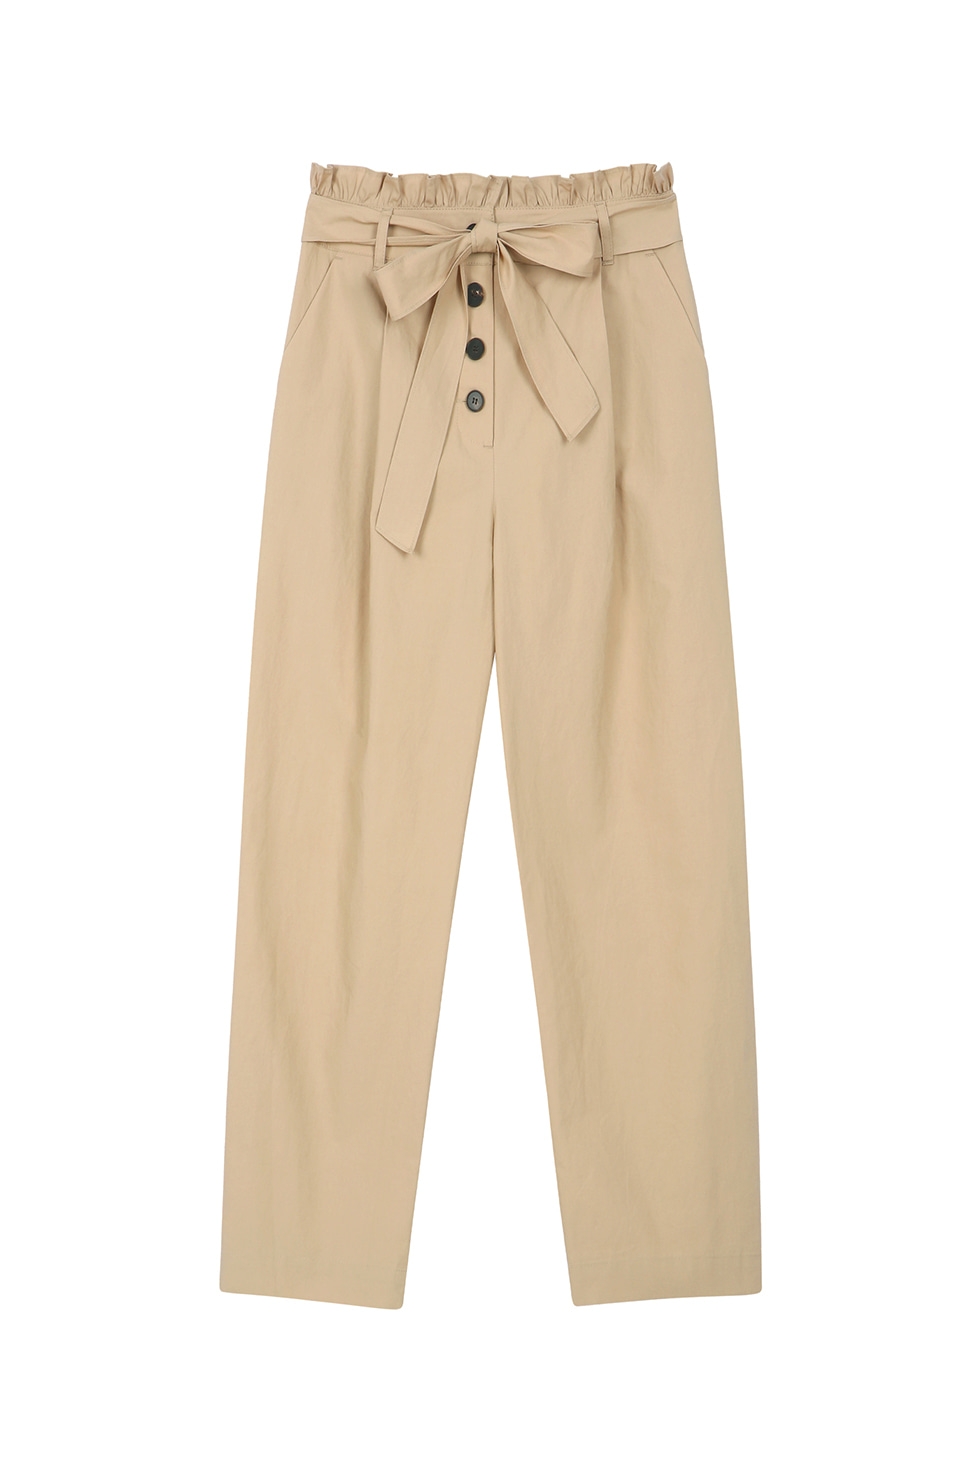 BUTTON UP SHIRRING PANTS - BEIGE